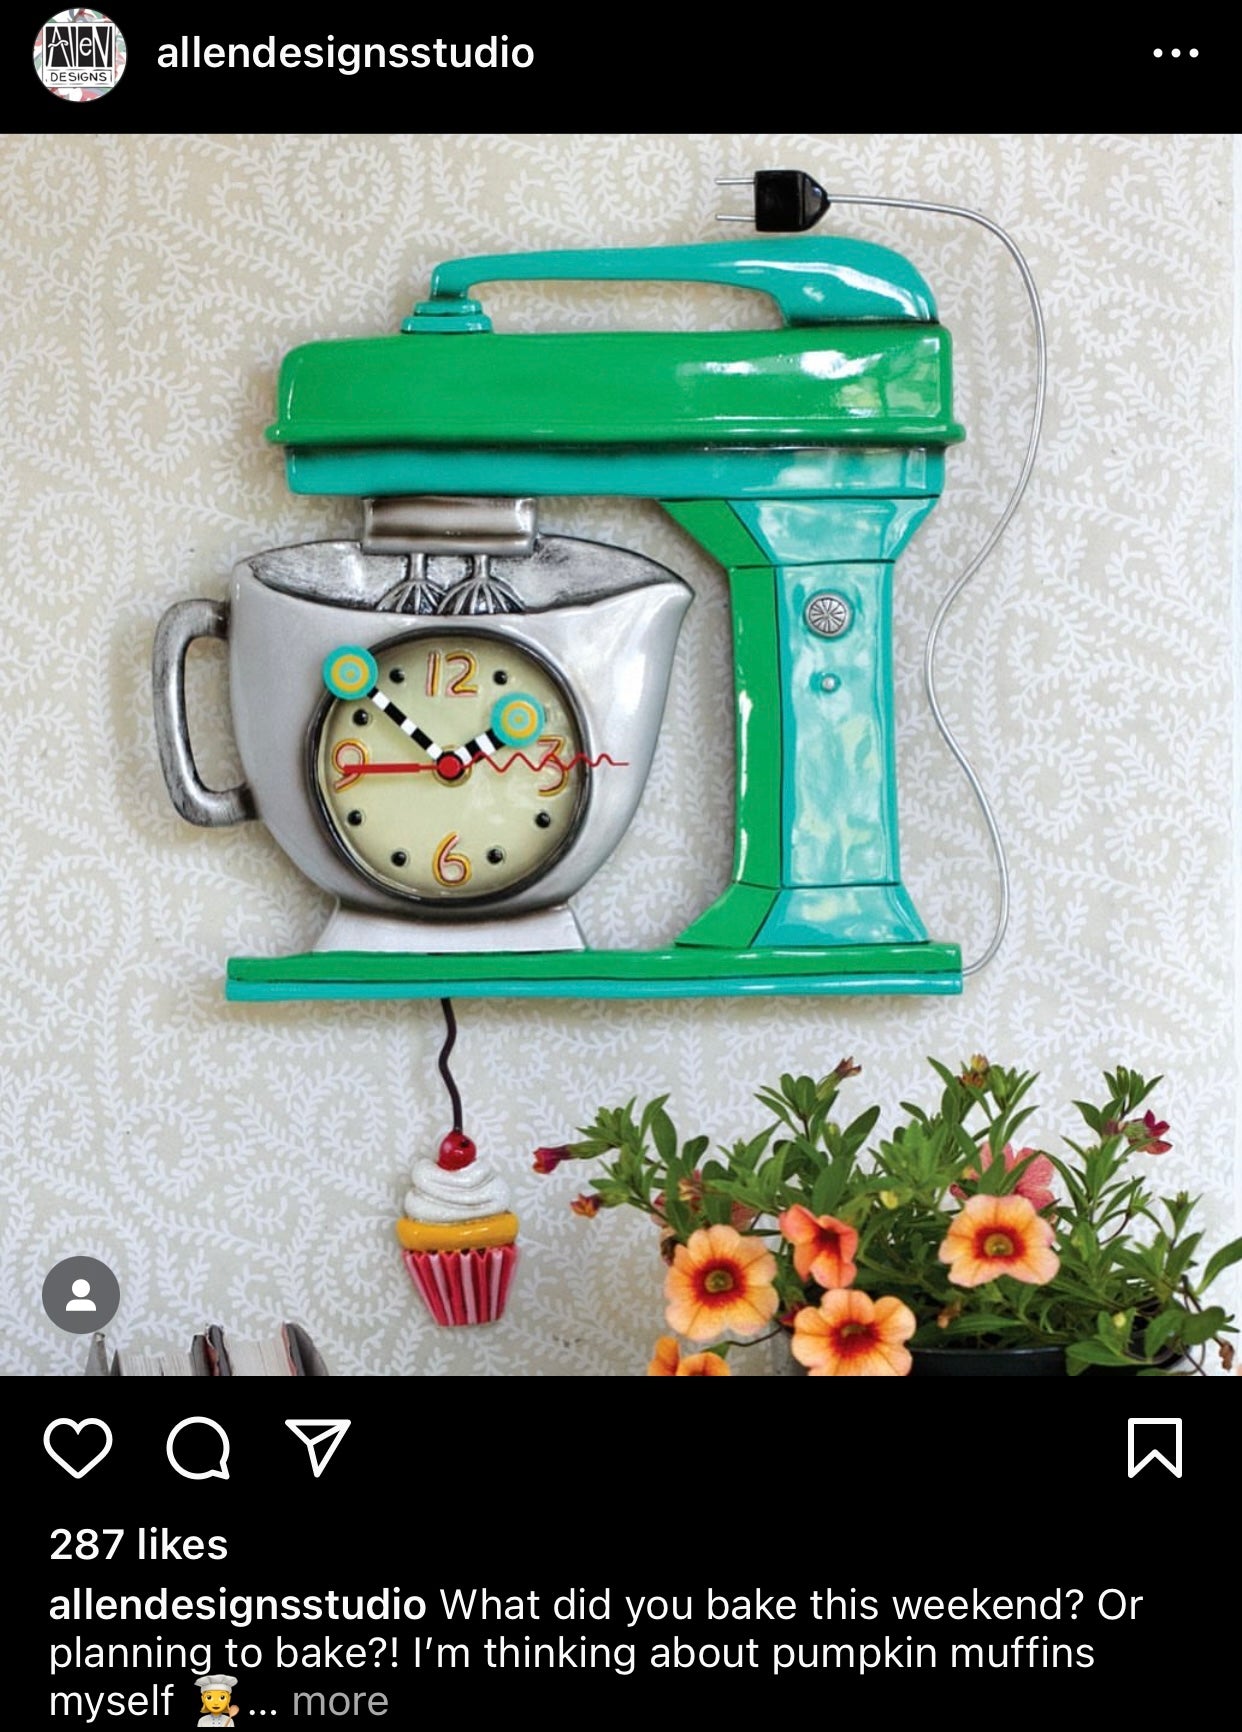 Clock Wall Vintage Green Mixer Cooking Funky Retro - The Renmy Store Homewares & Gifts 